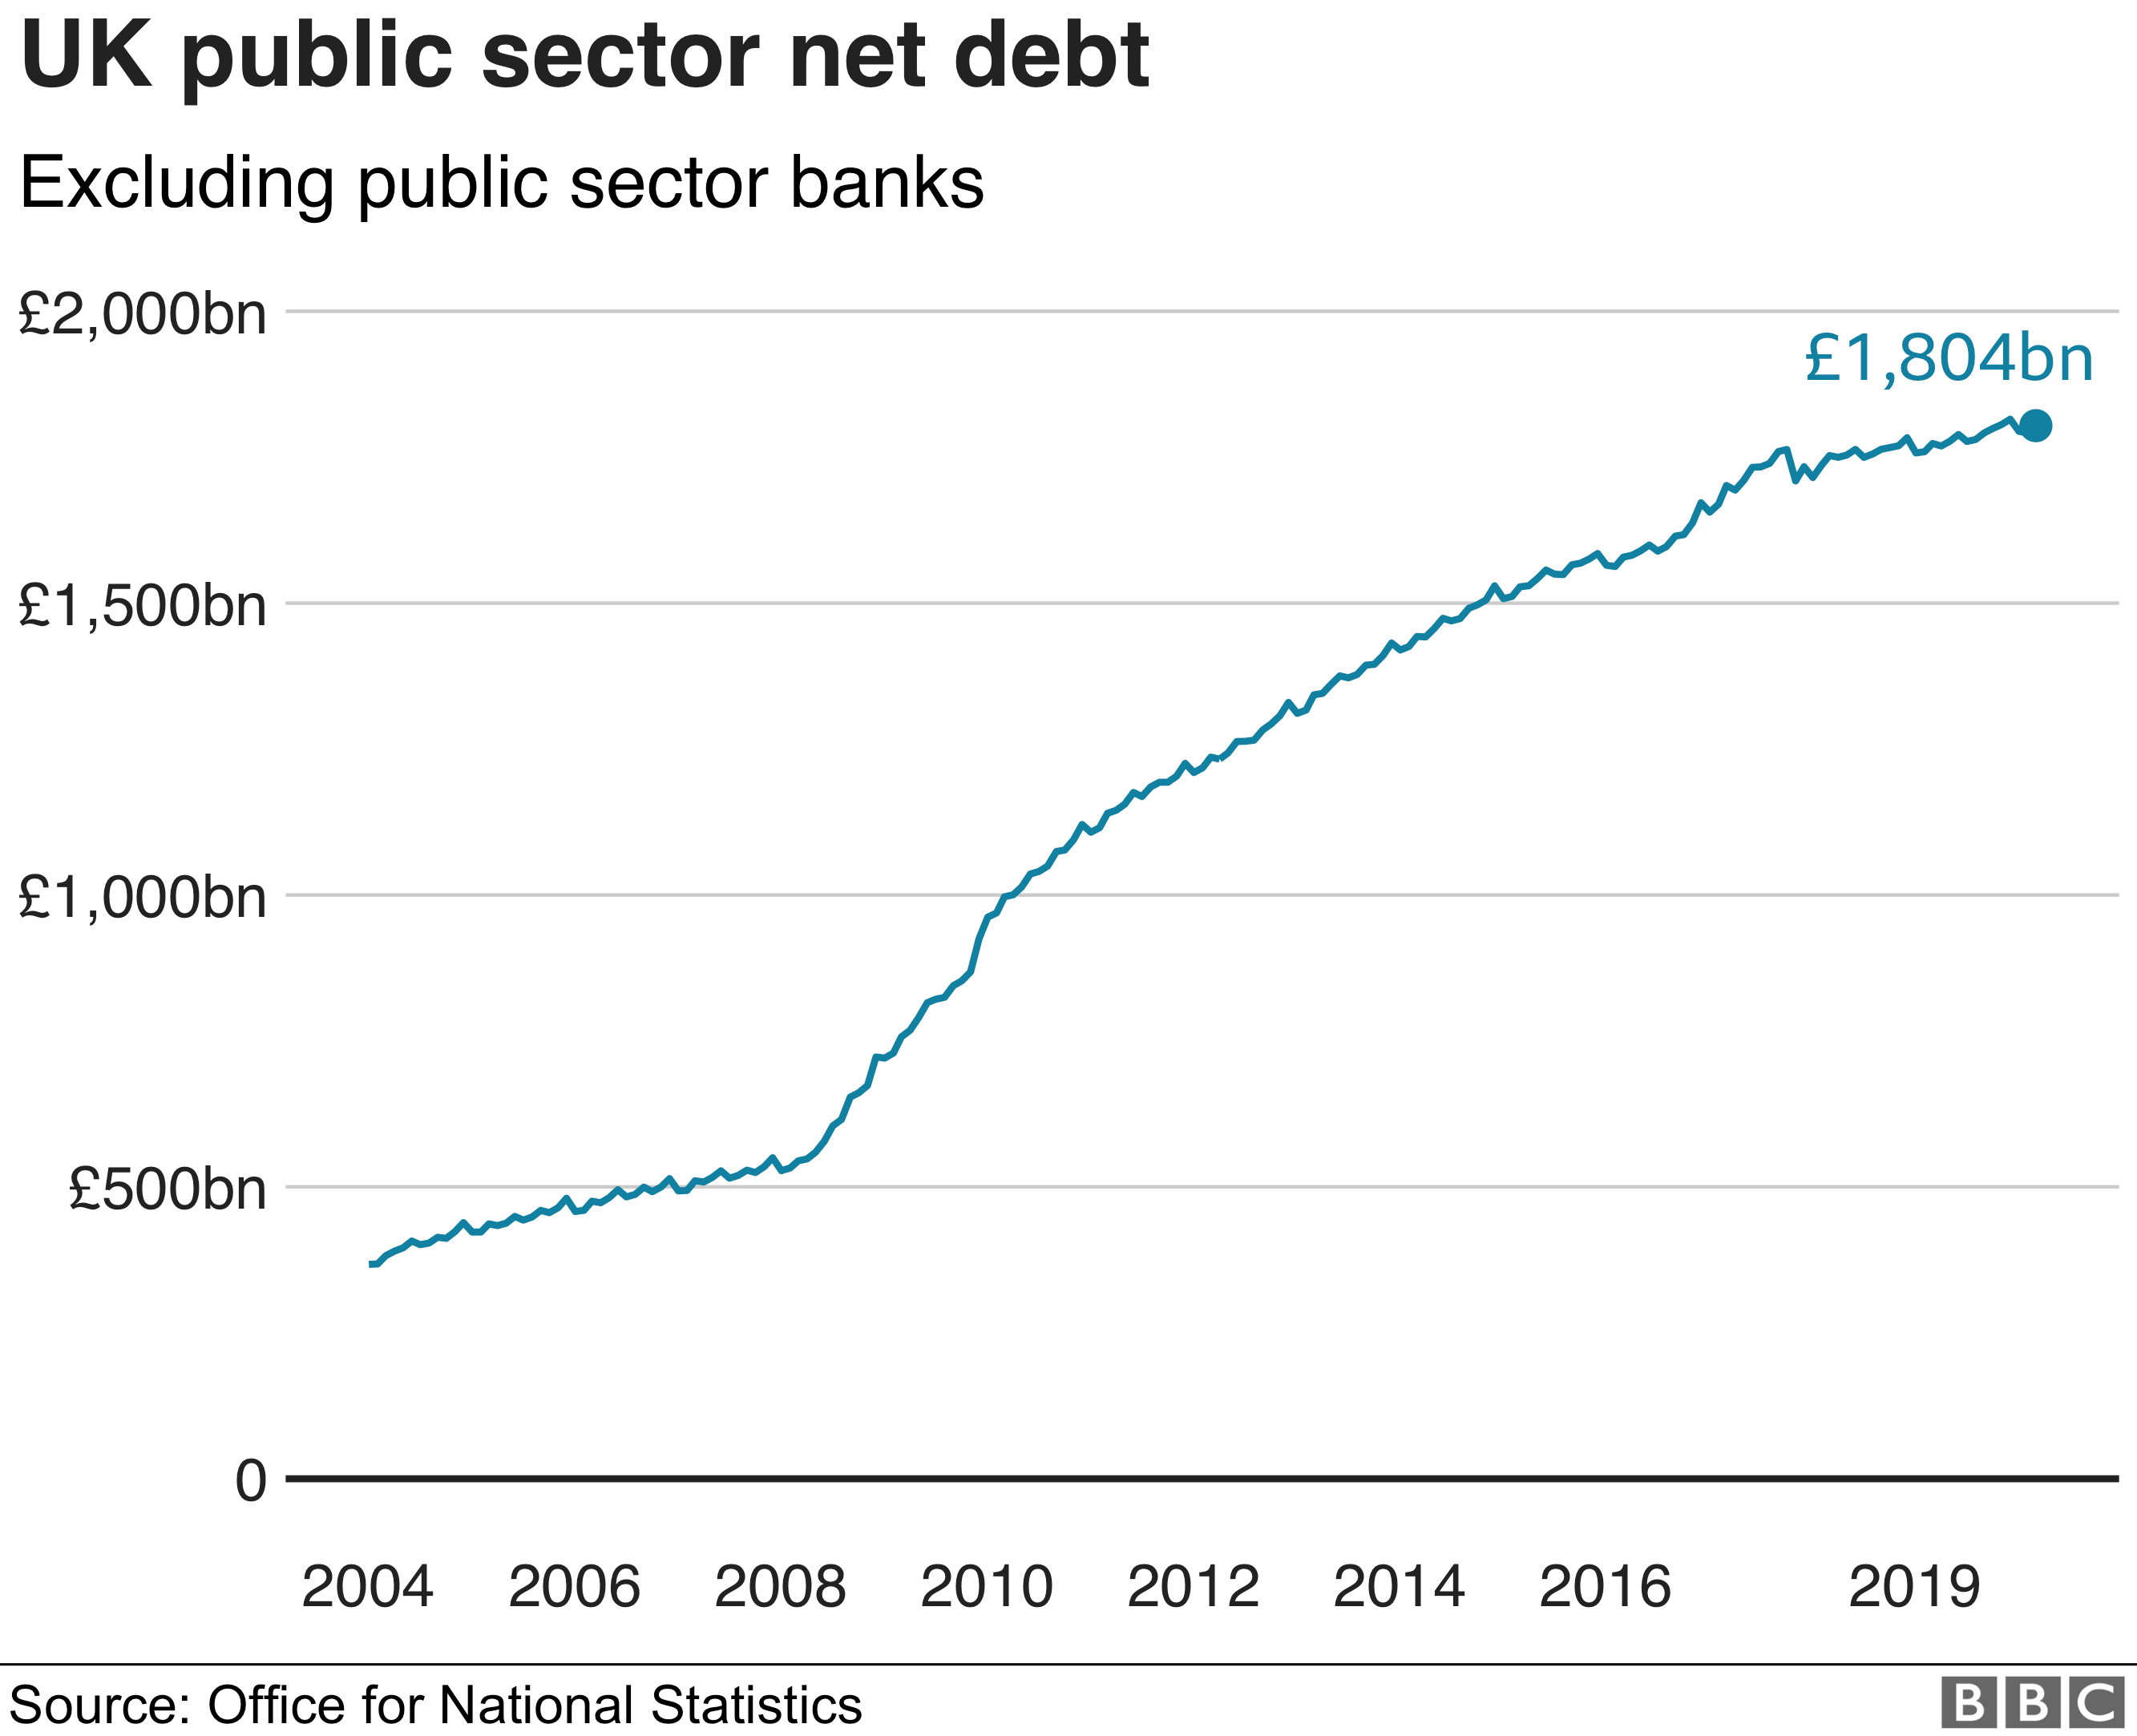 The total net debt for the UK public sector